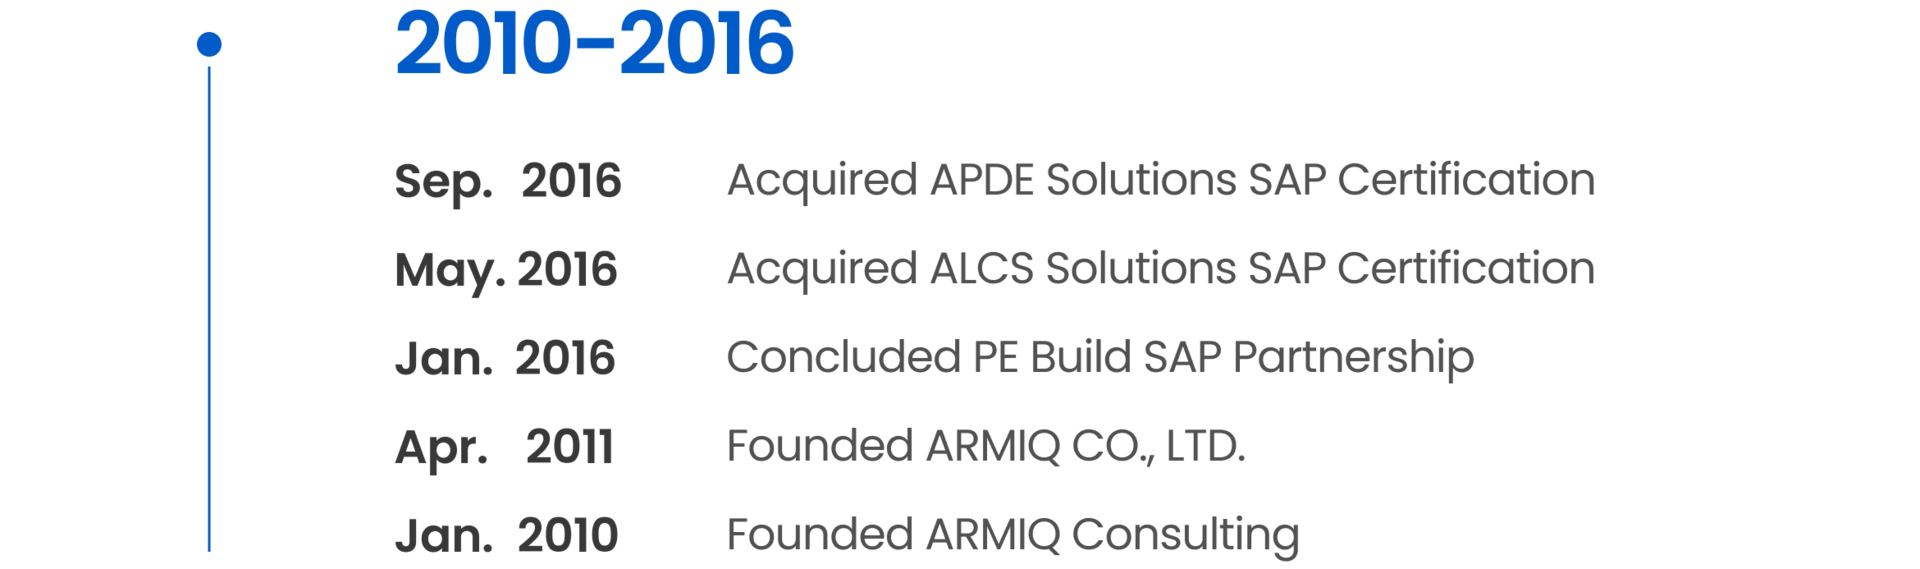 Sep. 2016 Acquired APDE Solutions SAP Certification May. 2016 Acquired ALCS Solutions SAP Certification Jan. 2016 Concluded PE Build SAP Partnership Apr. 2011 Founded ARMIQ CO., LTD. Jan. 2010 Founded ARMIQ Consulting